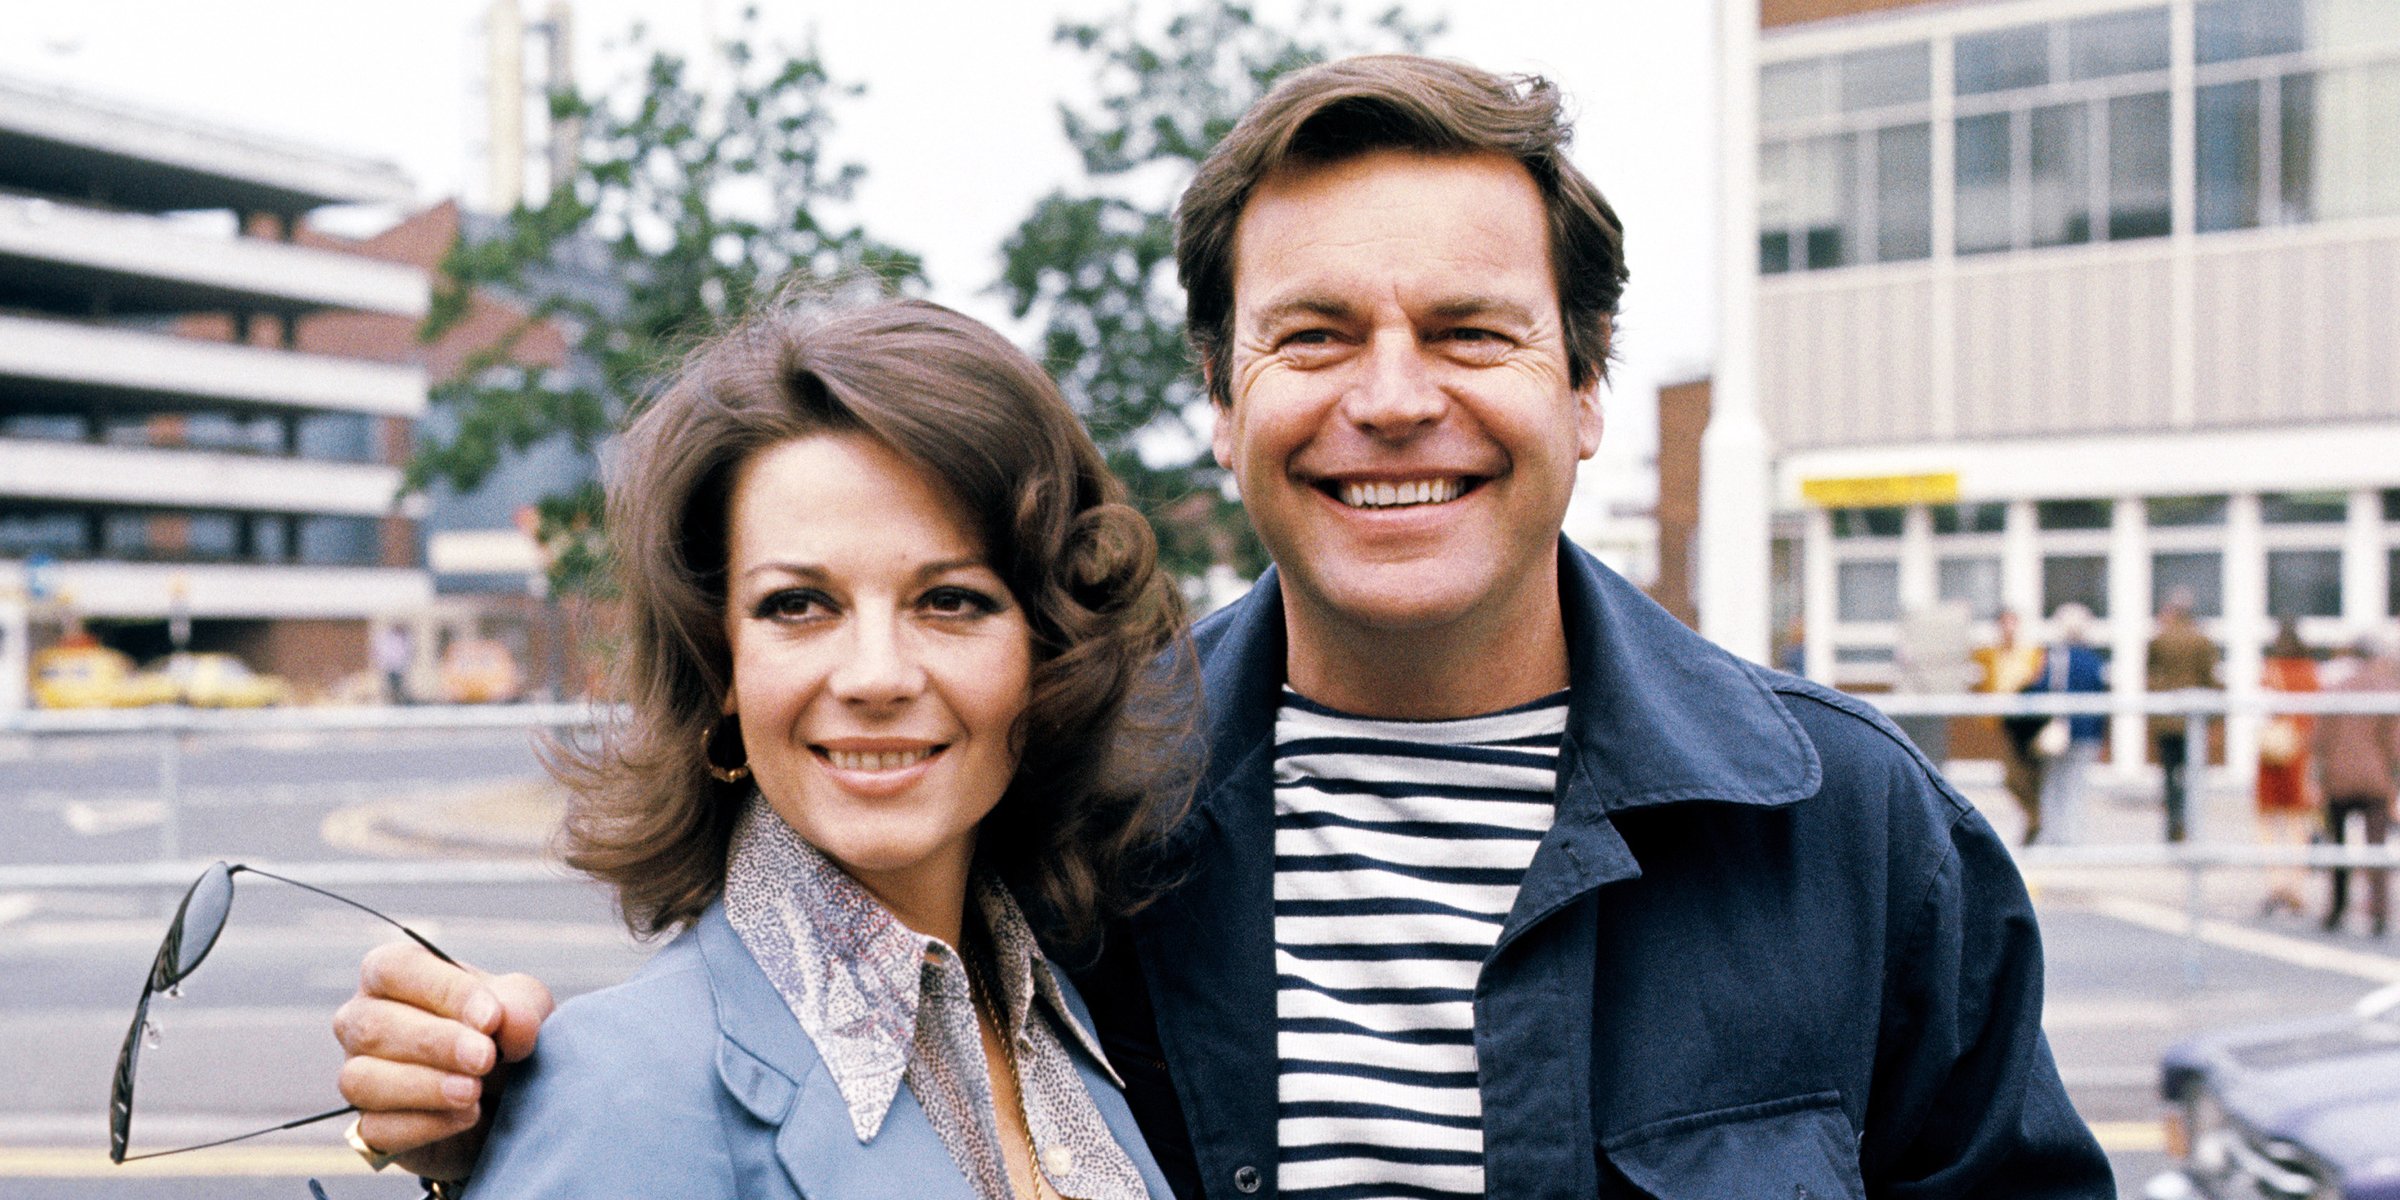 Natalie Wood and Robert Wagner. | Source: Getty Images